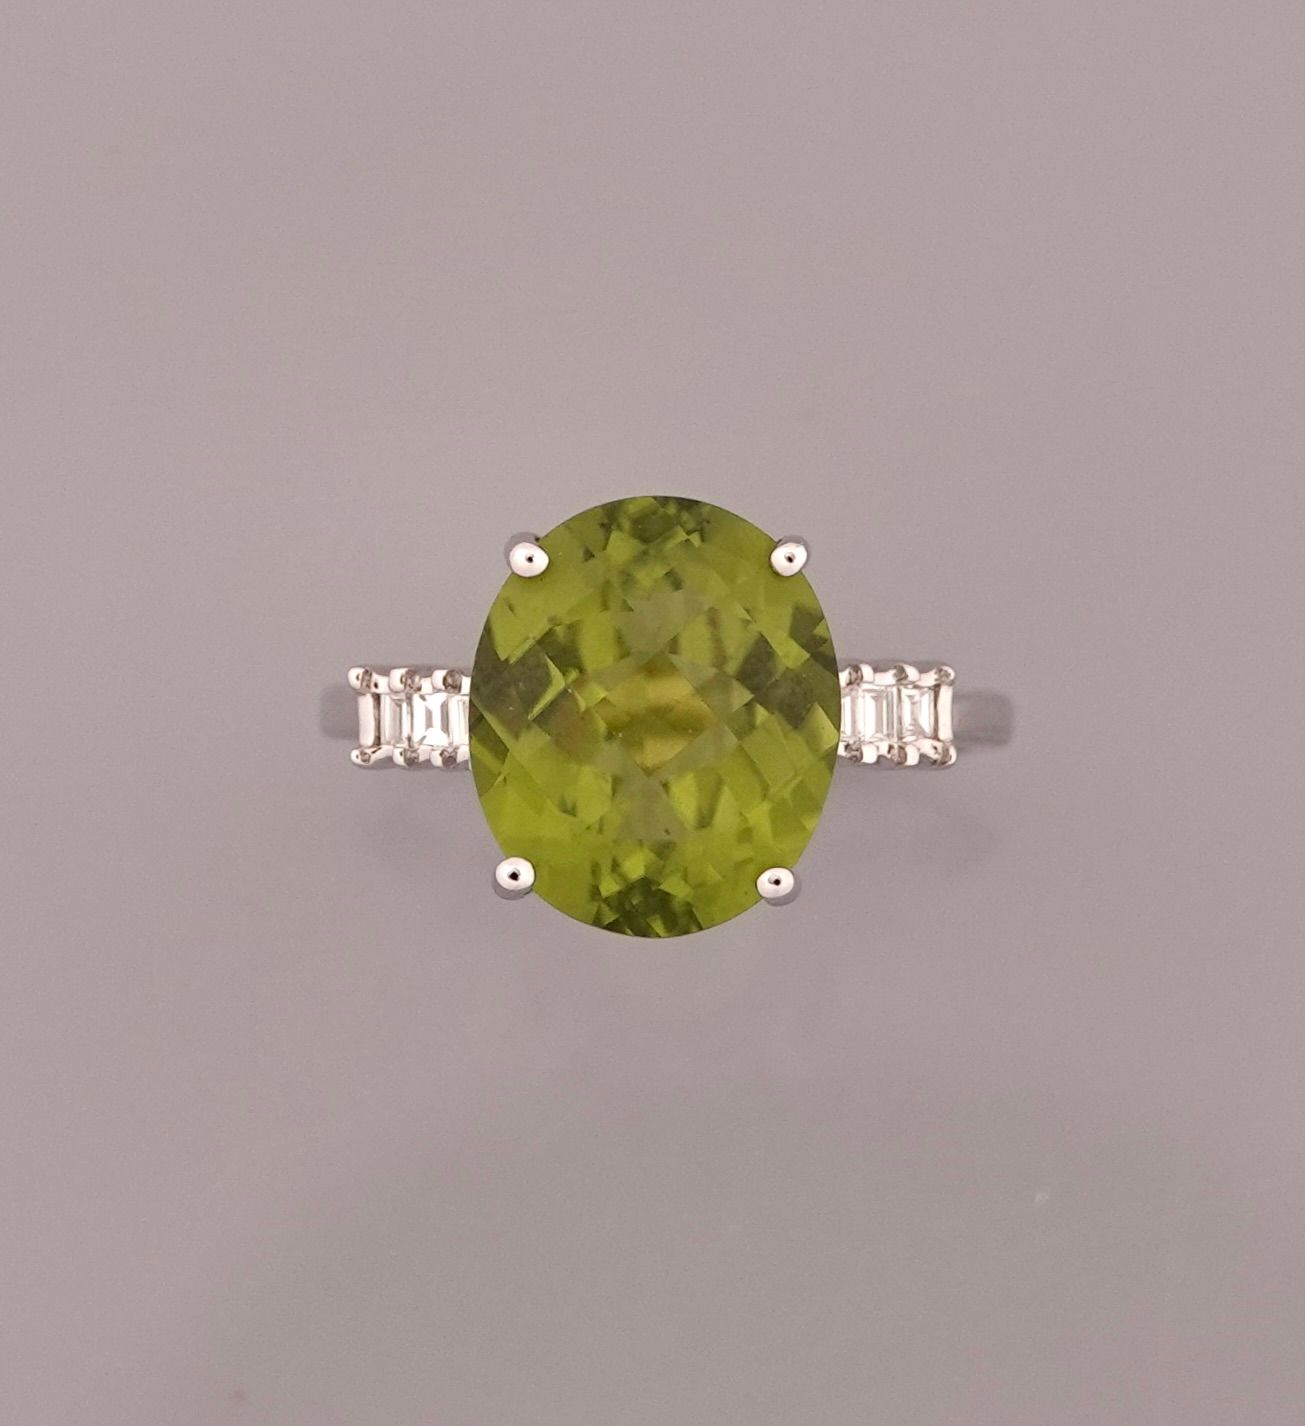 Null Ring in white gold, 750 MM, set with an oval peridot weighing 5.07 carats w&hellip;